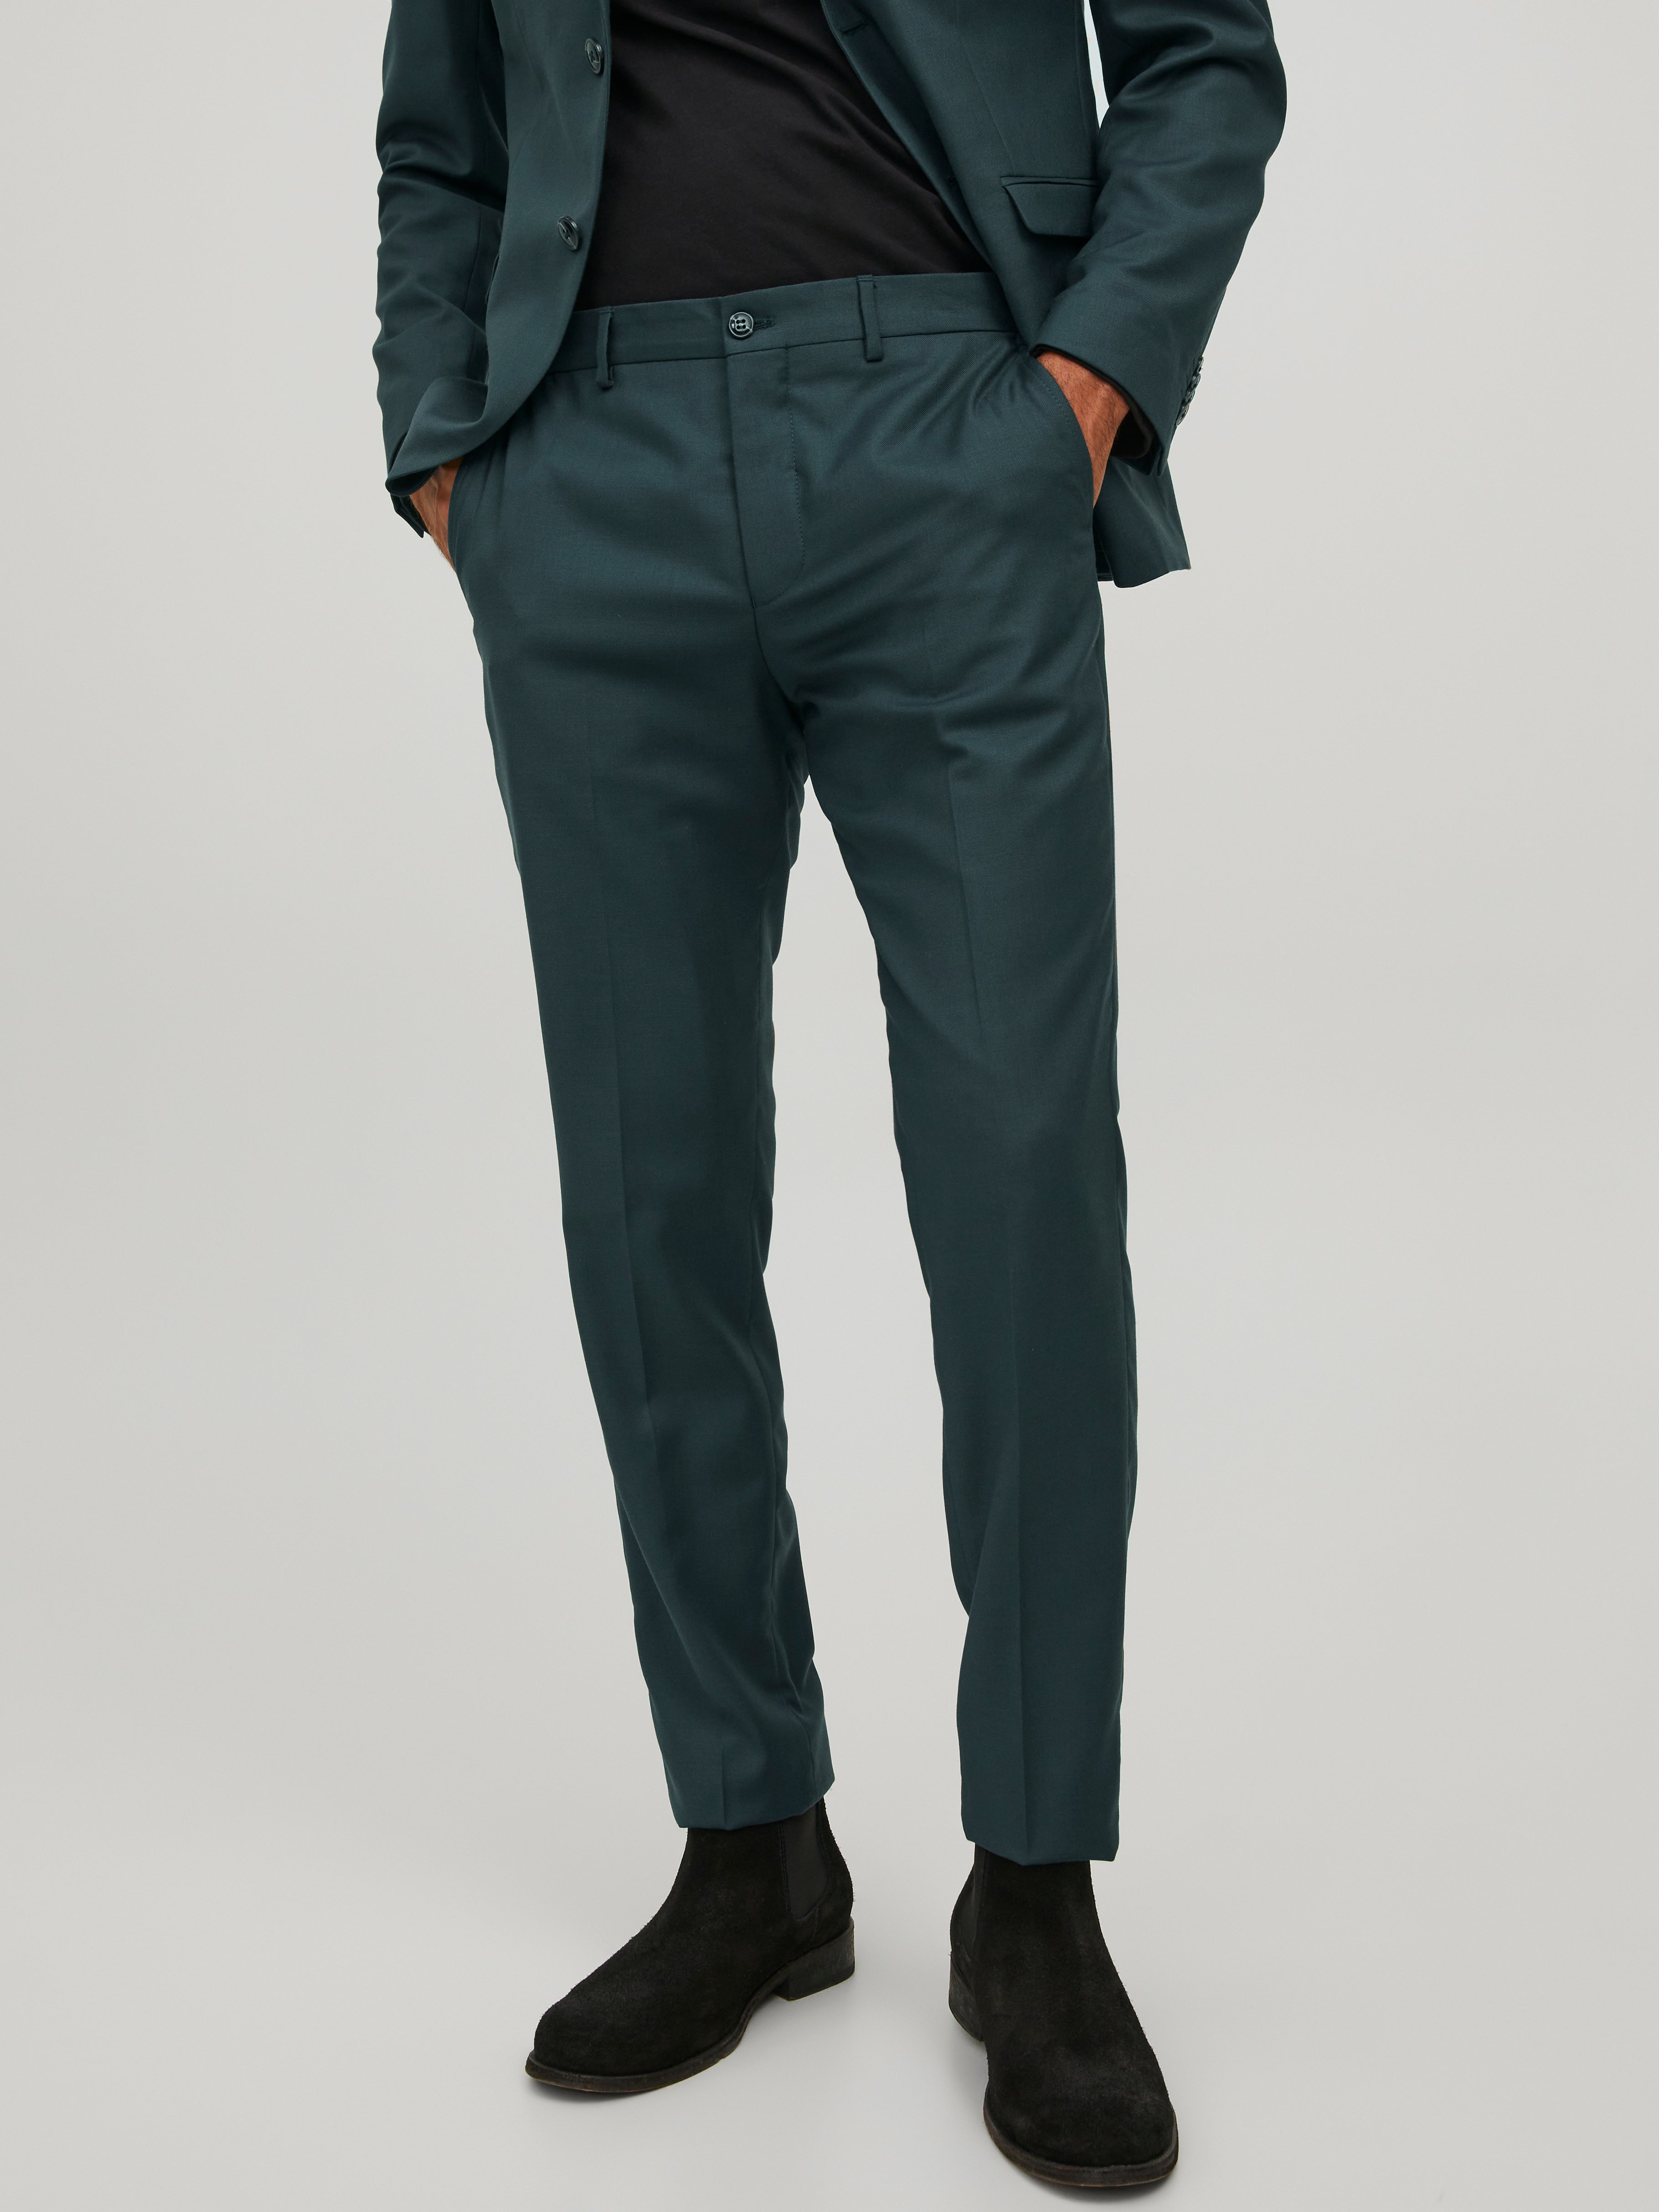 Buy Super Slim Fit Trousers online in India